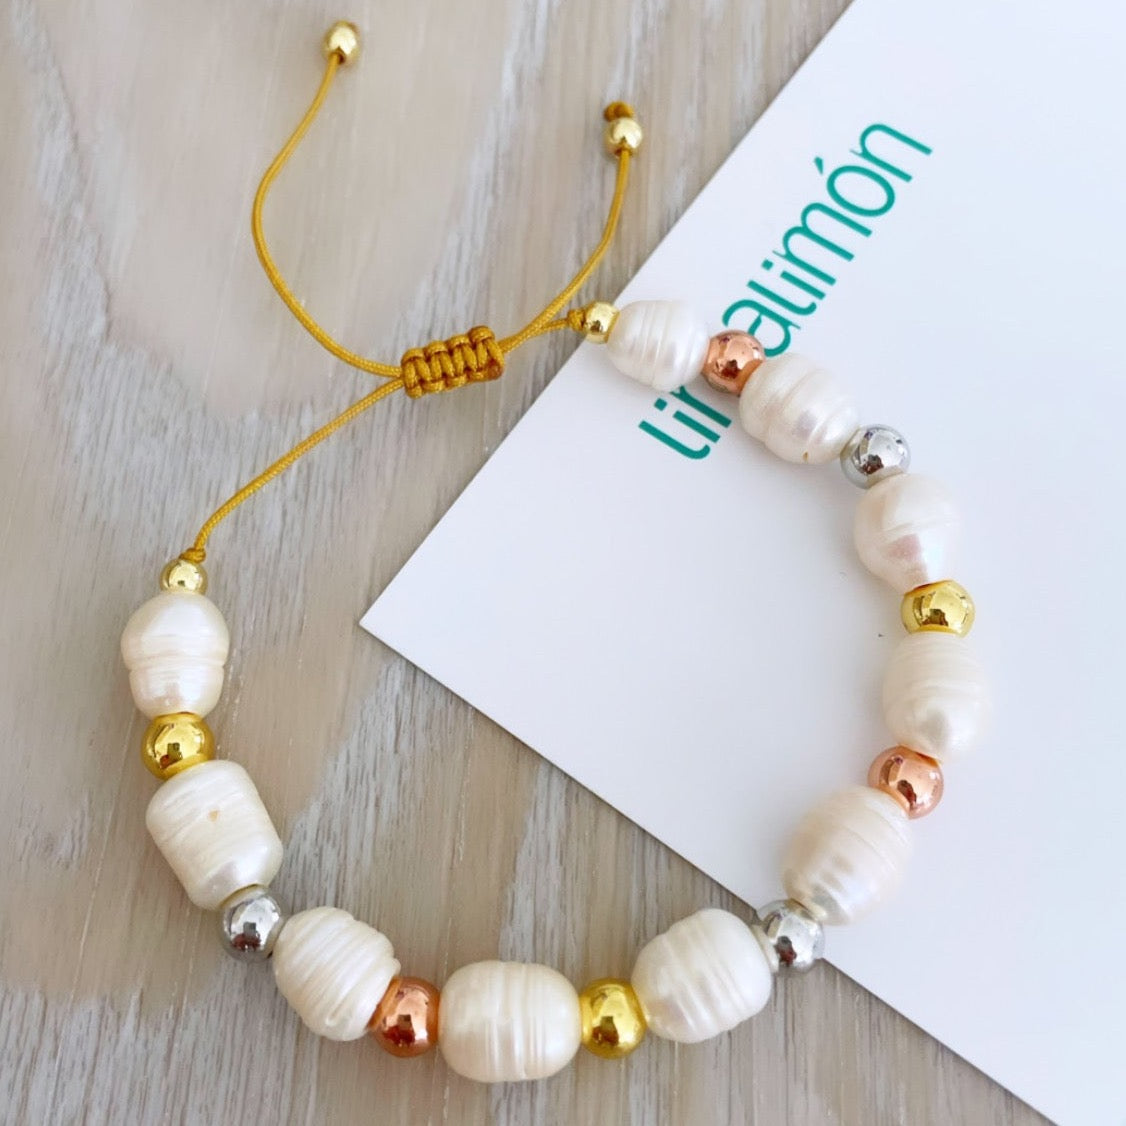 Pearl and Beads Bracelet - LimaLimón Store